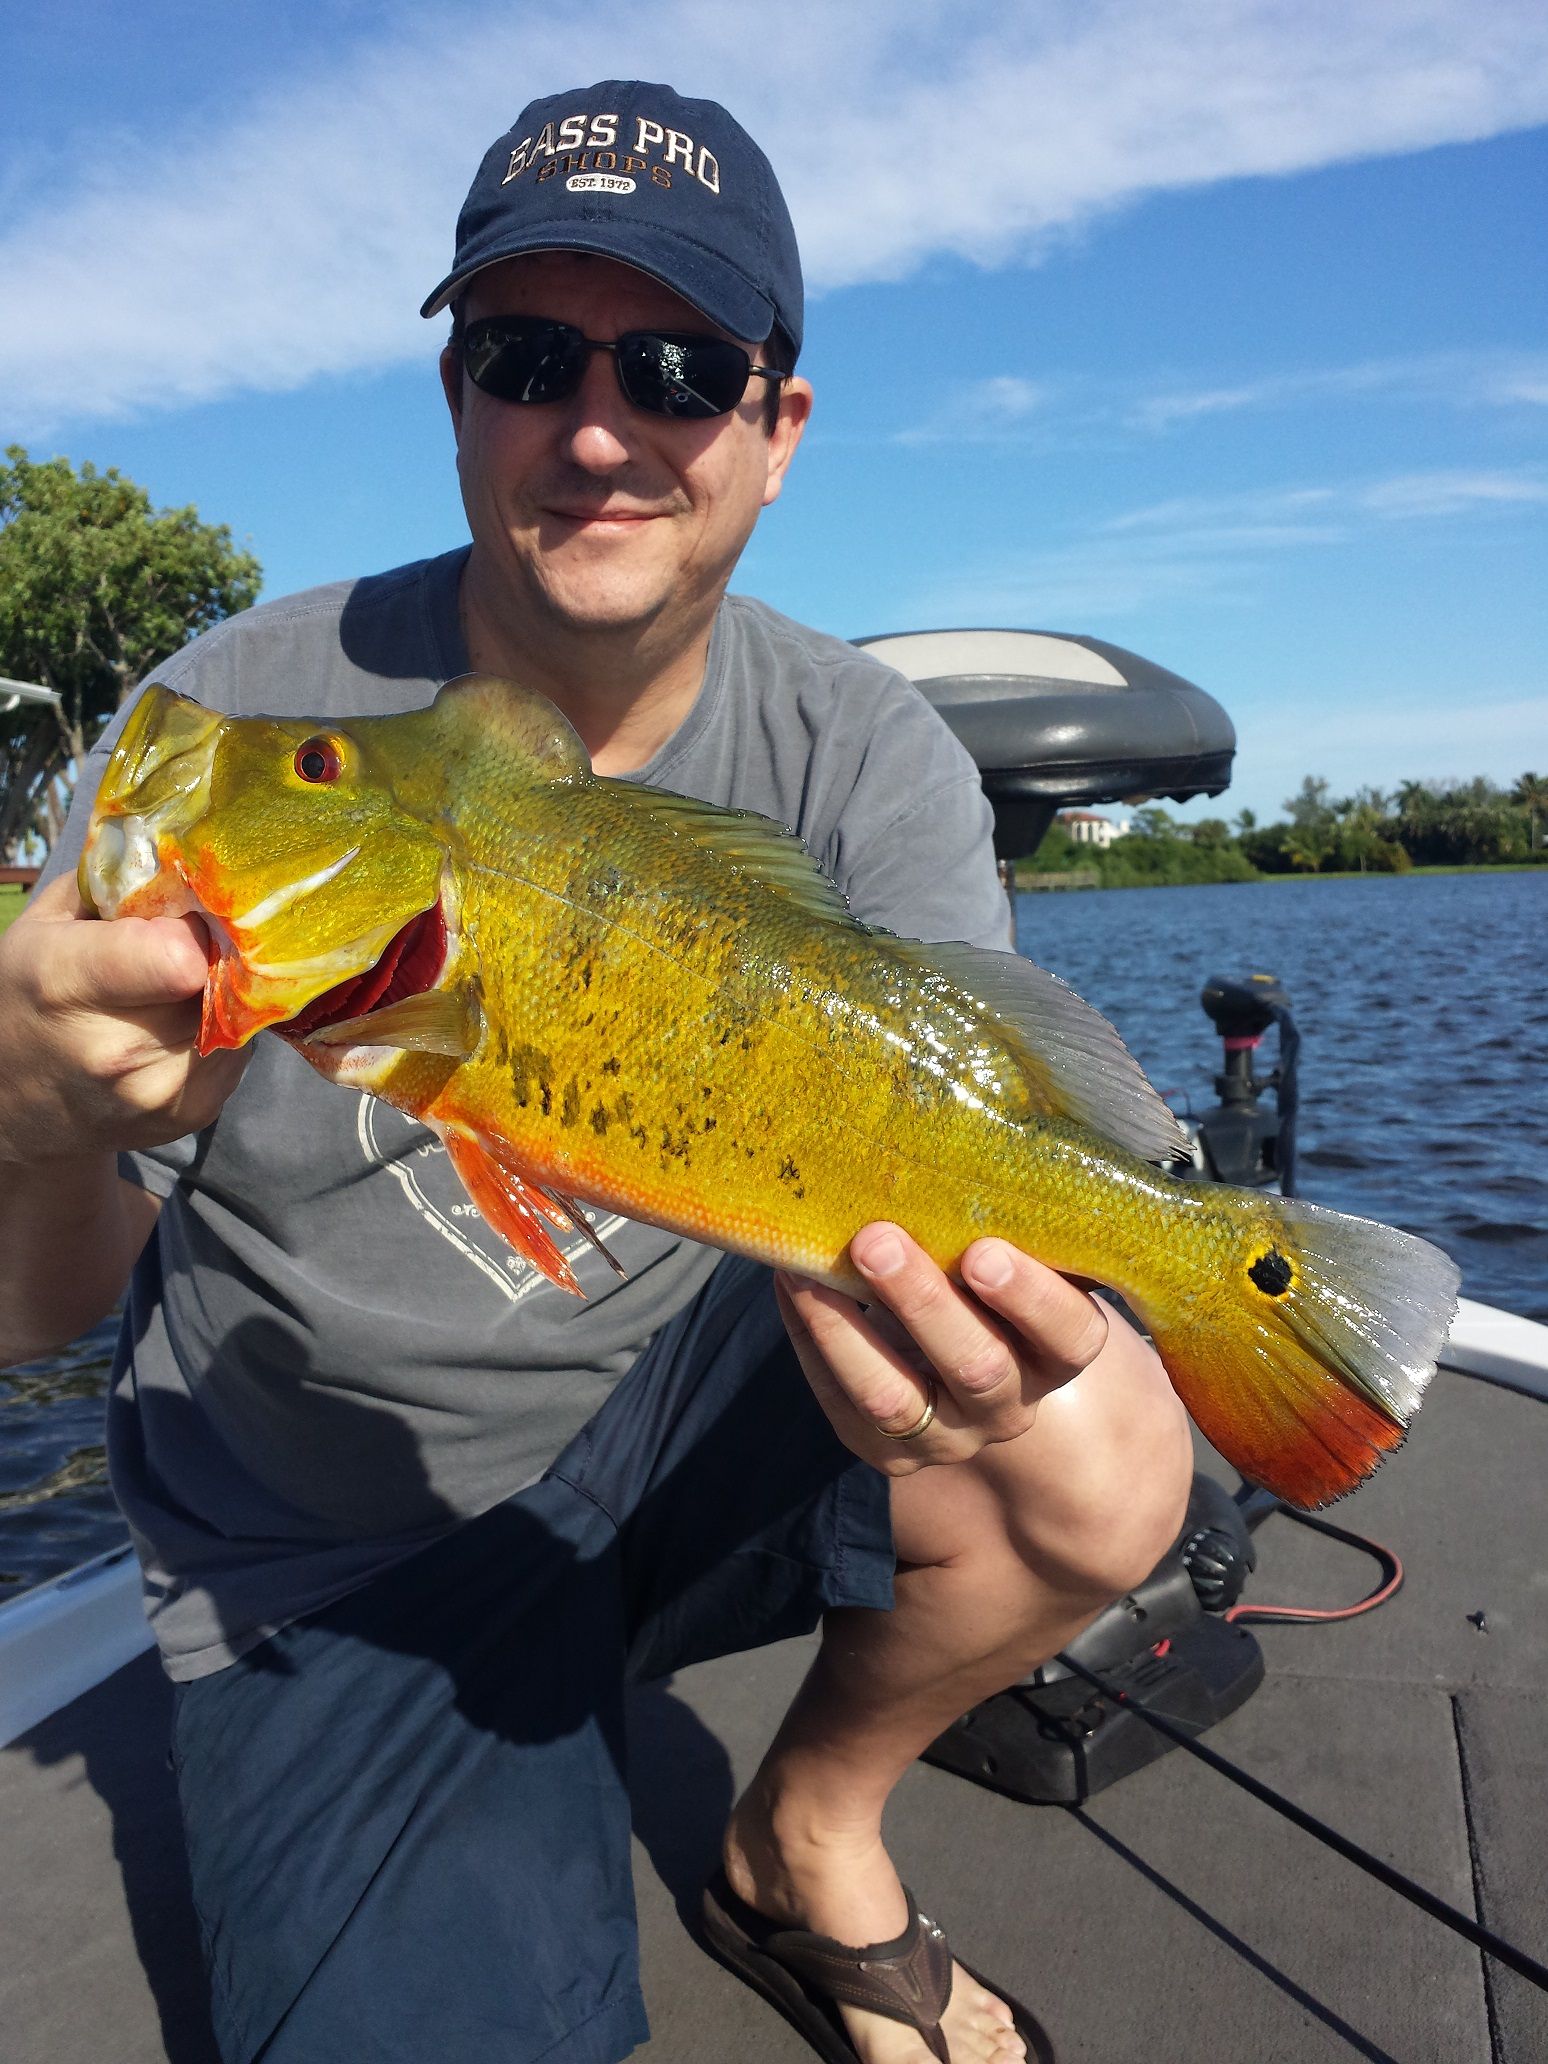 20150504 Me with a peacock bass caught in the canals around Miami on a fishing trip with my father.